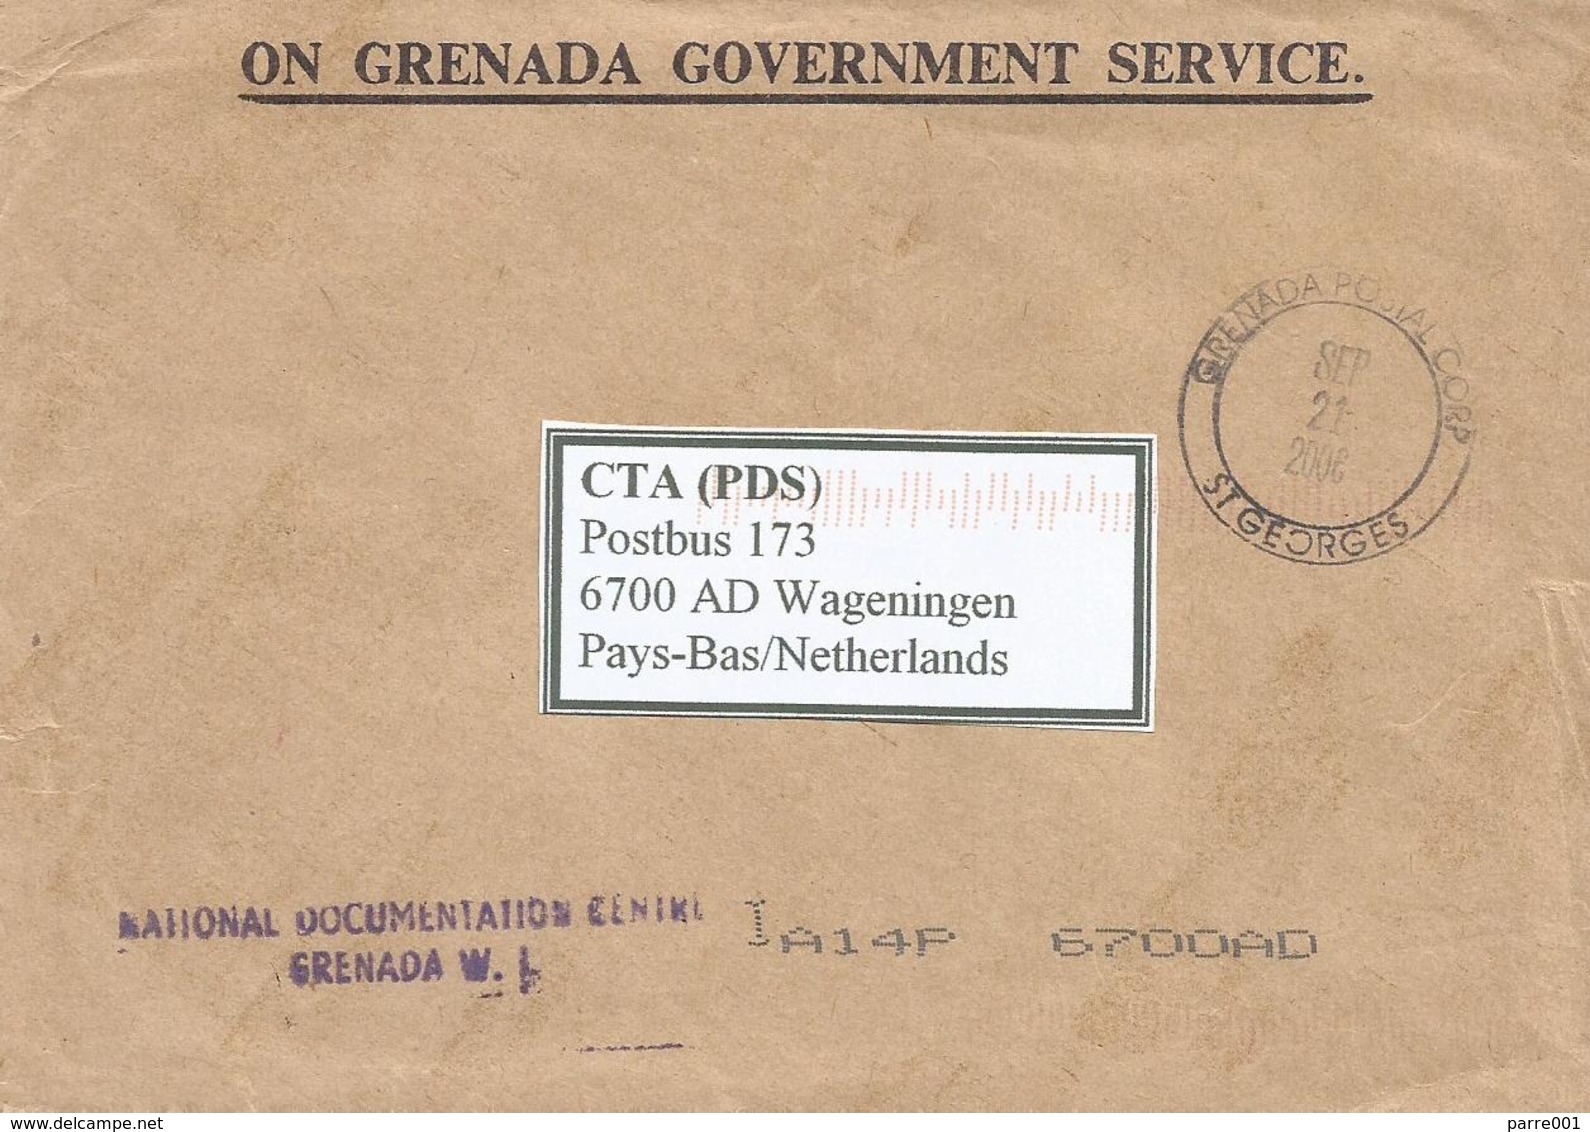 Grenada 2006 St Georges Unfranked Official Postage Paid Cover - Grenada (1974-...)